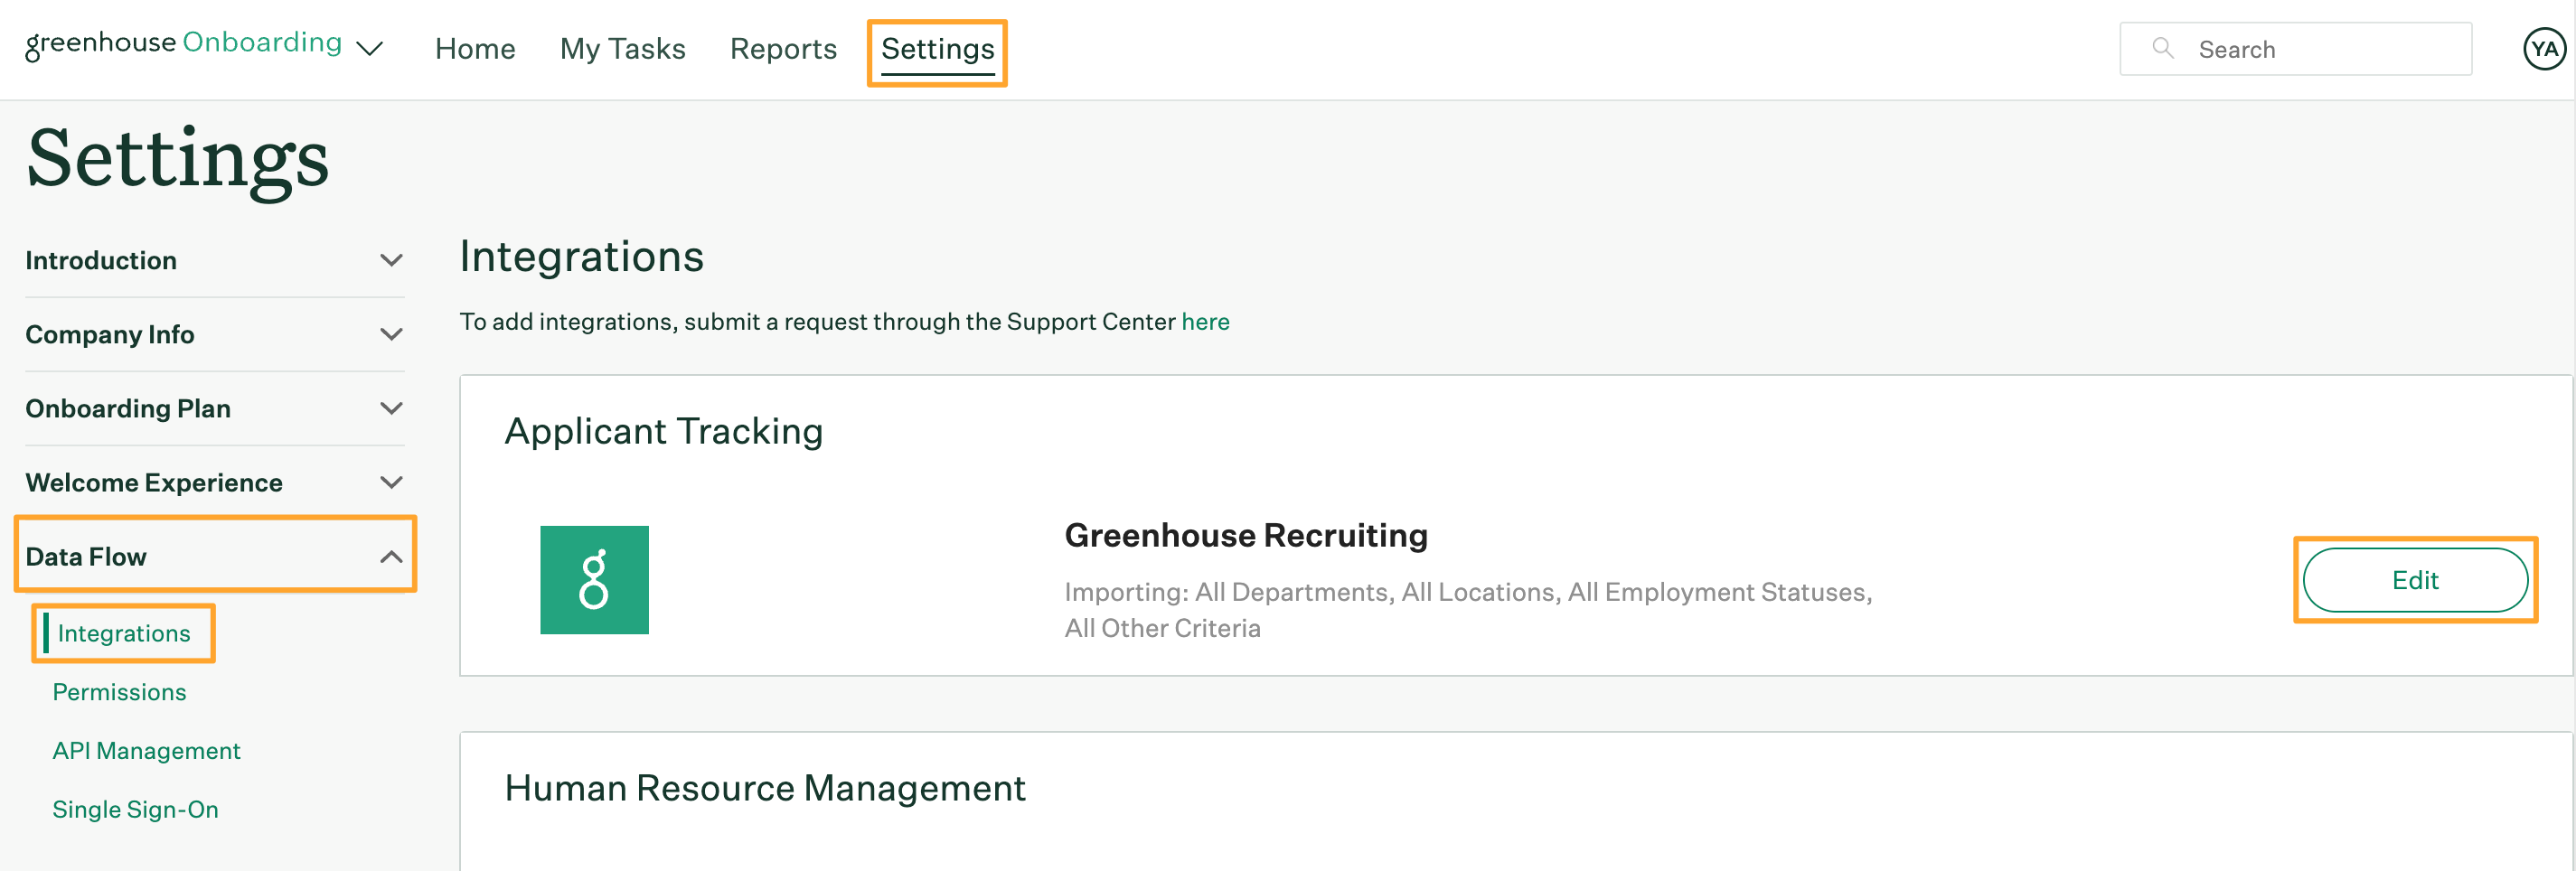 Greenhouse Onboarding Settings with Integrations page opened and Edit button for Greenhouse Recruiting integration highlighted